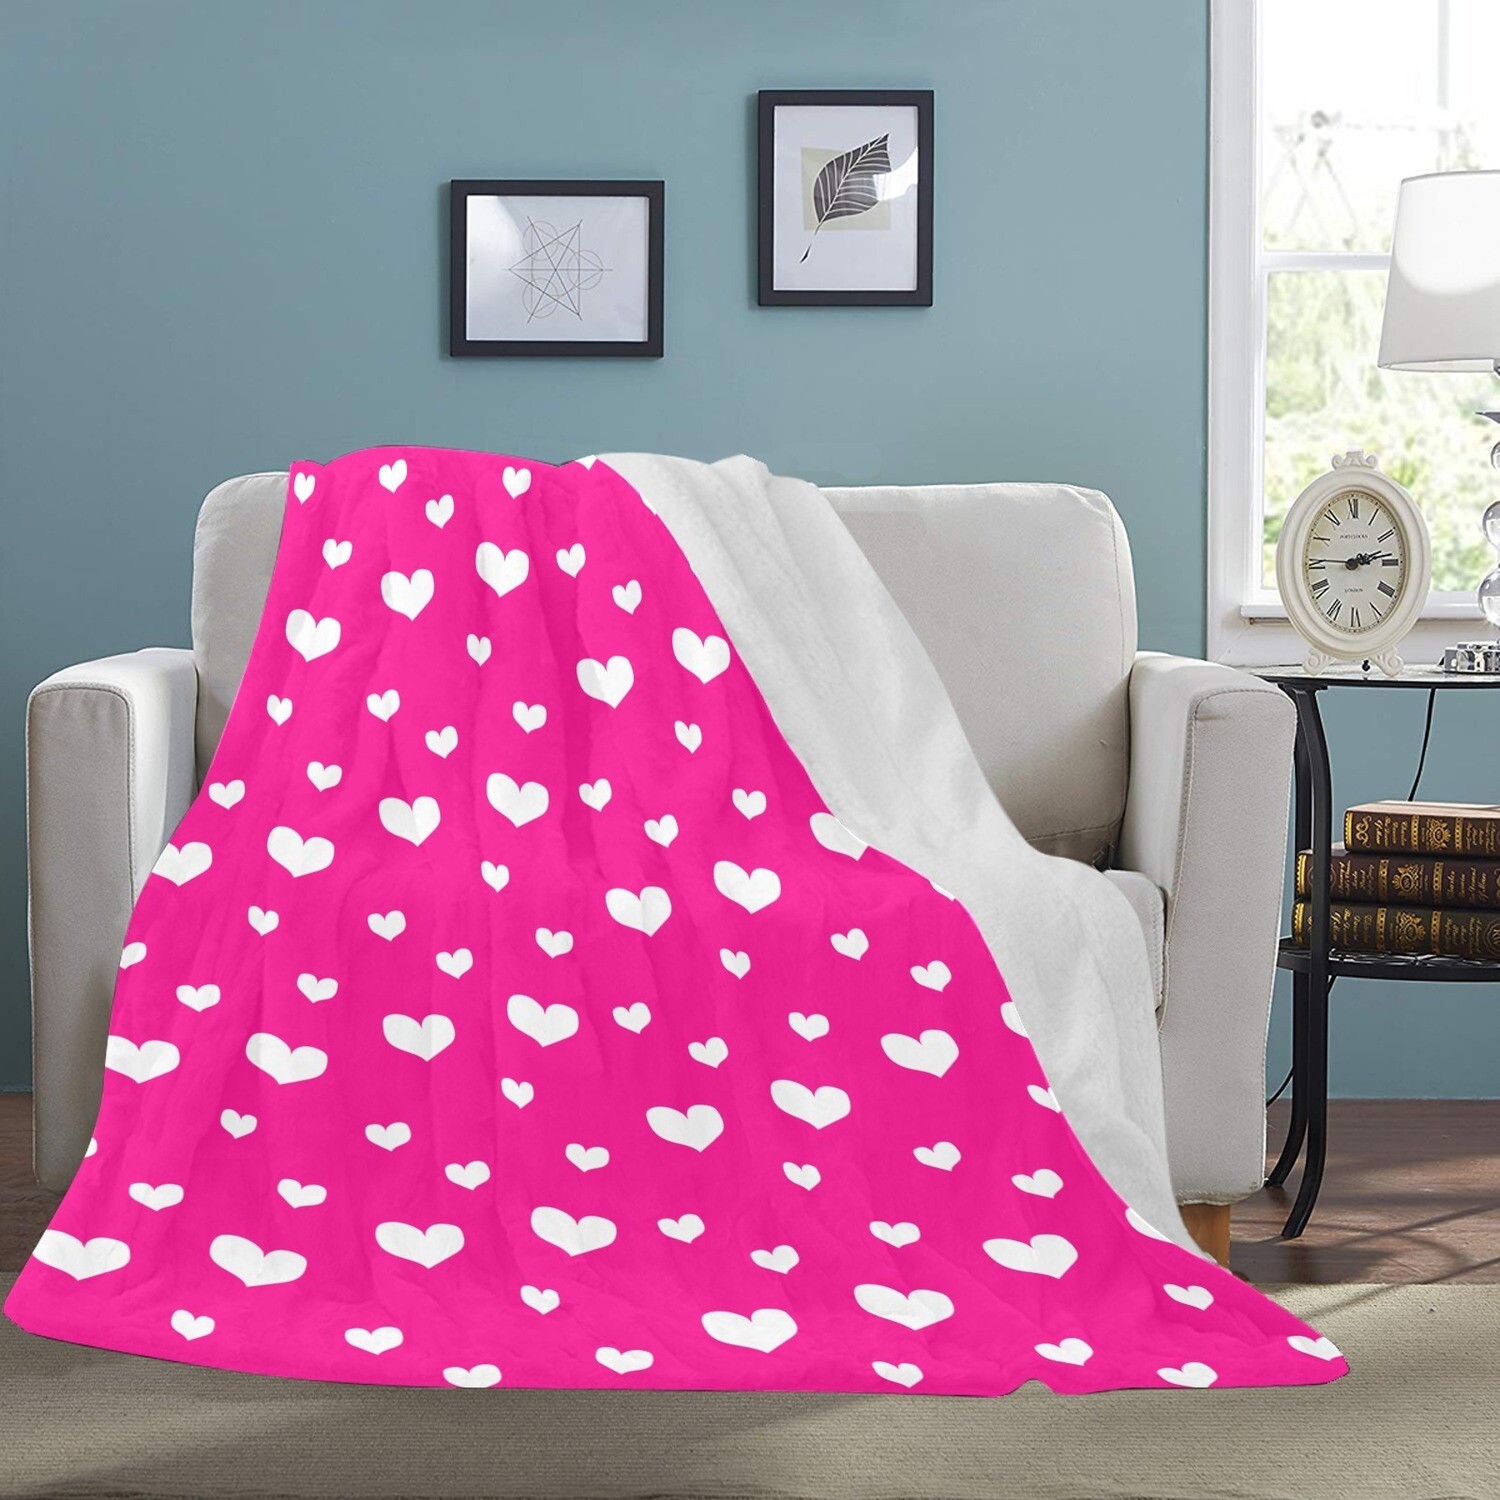 🤴🏽👸🏽💕Large Ultra-Soft Micro Fleece Blanket Valentine white hearts on hot pink, gift, gift for her, gift for him, gift for them, 70"x80"